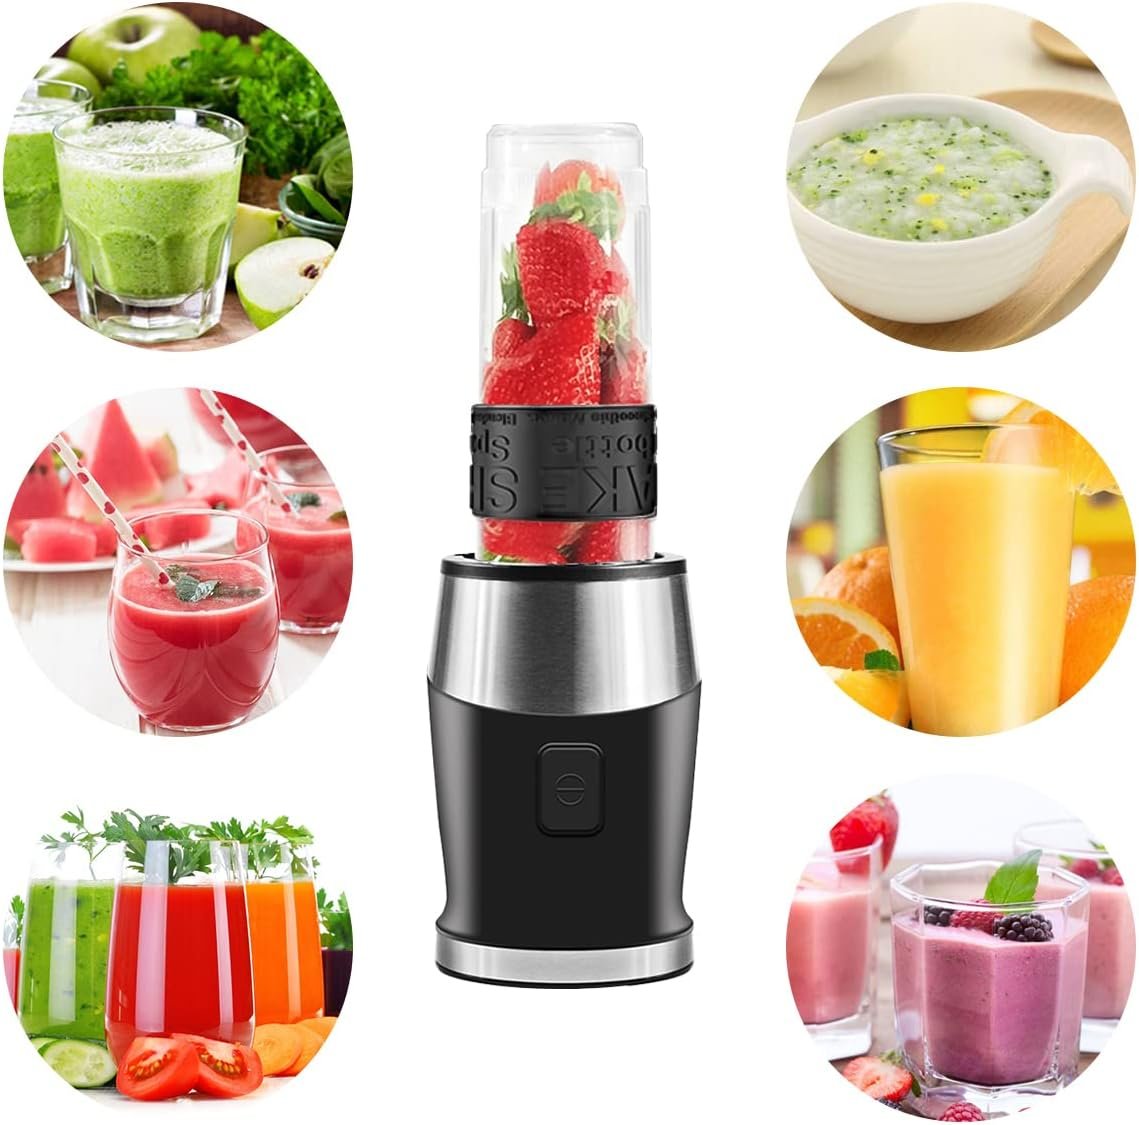 3 in 1 Nutri Blender and Food Processor Combo Review